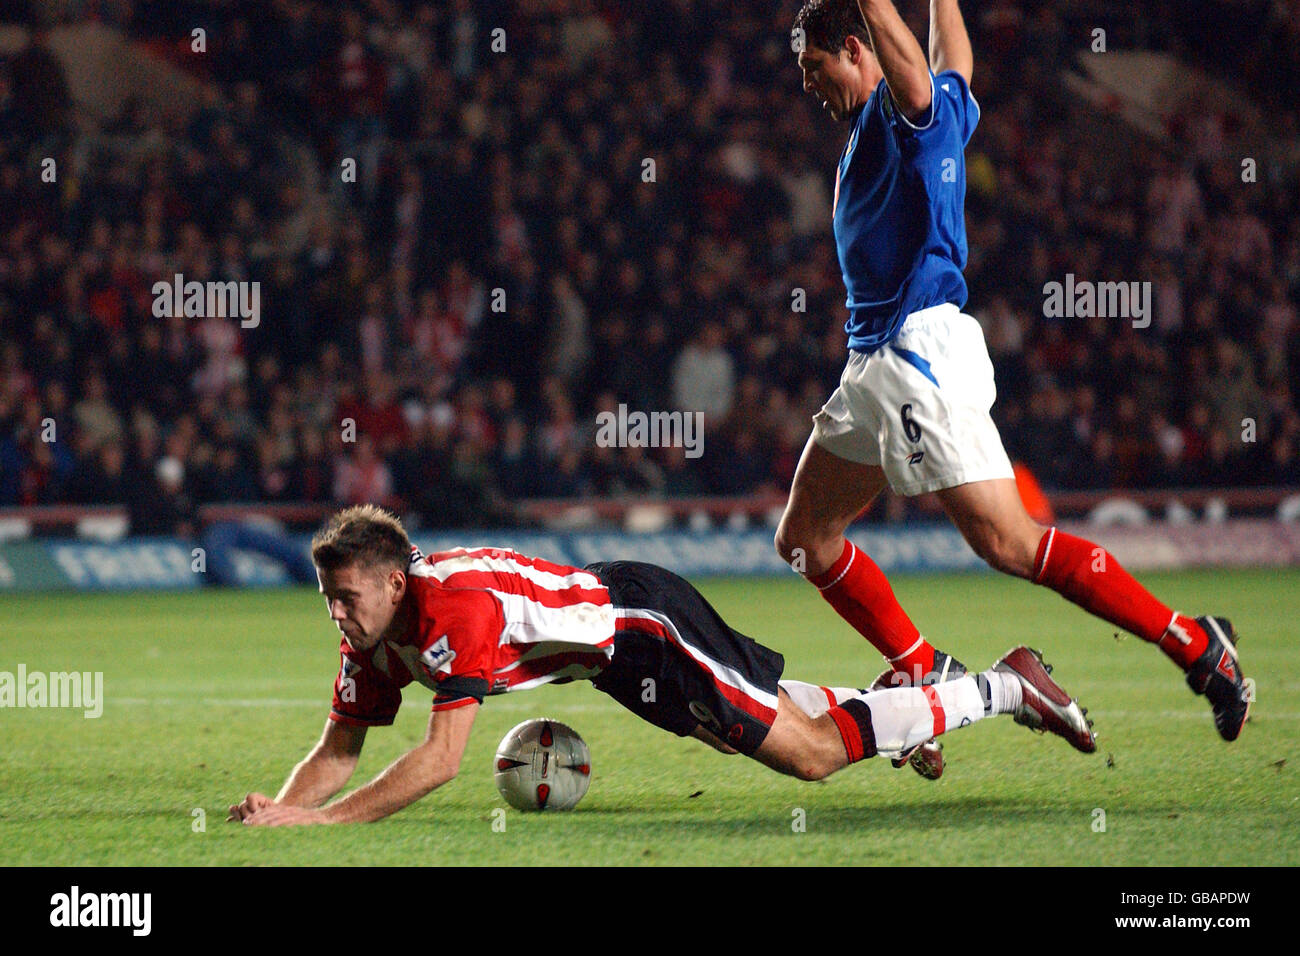 Soccer - Carling Cup - Fourth Round - Southampton v Portsmouth. Portsmouth's Arjan de Zeeuw (r) fouls Southampton's James Beattie (l) resulting in a penalty and a red card Stock Photo